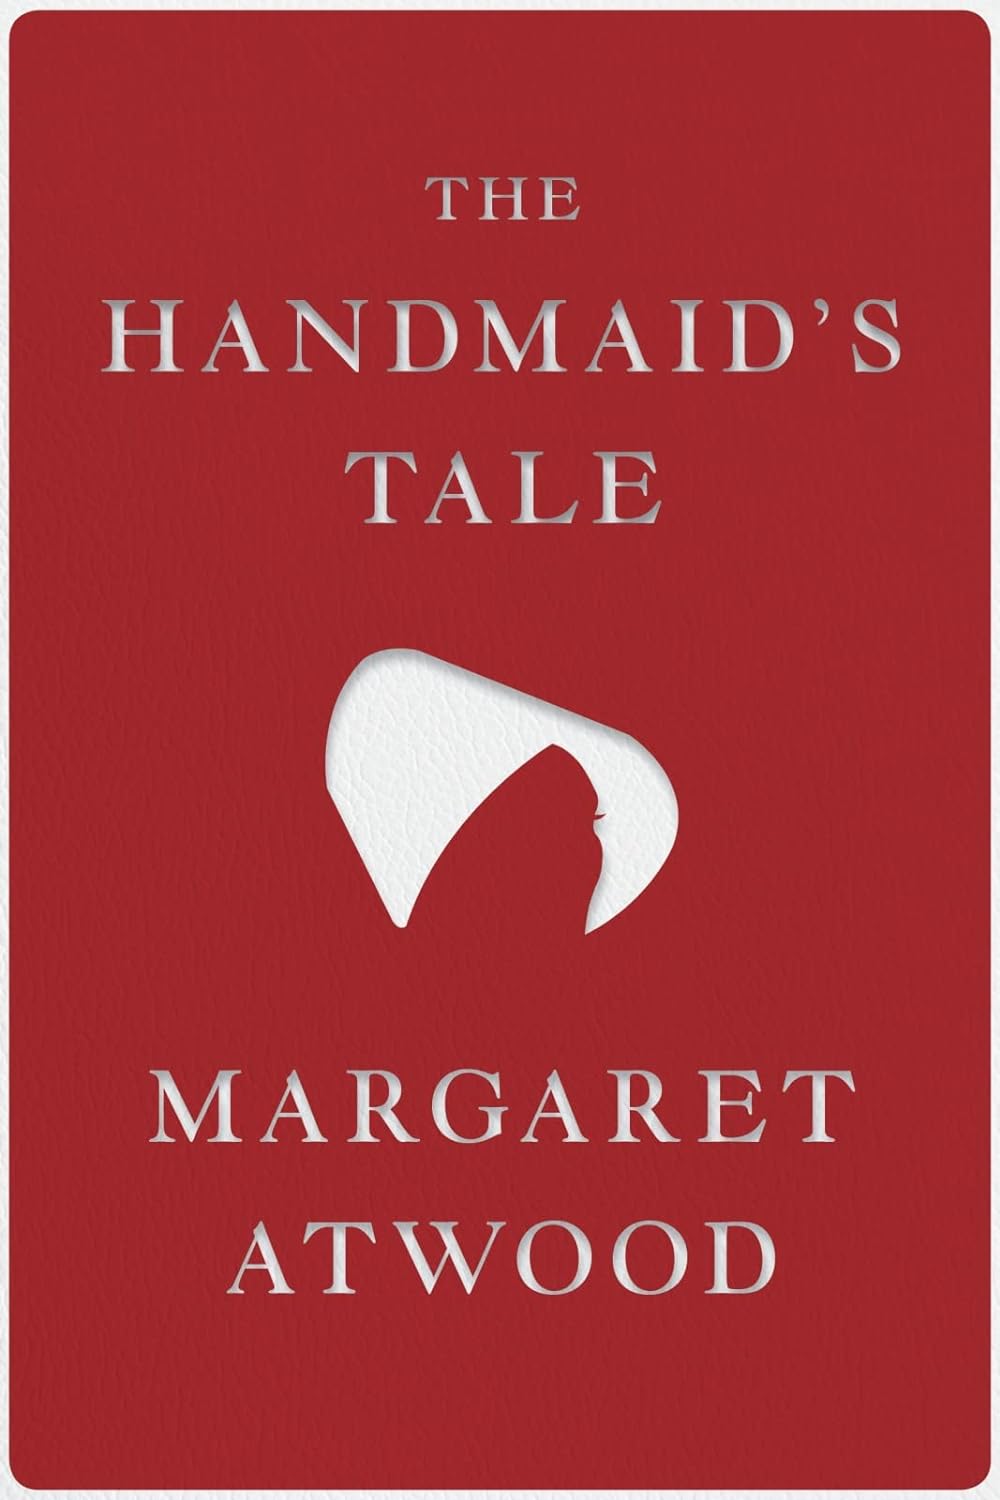 "The Handmaid's Tale" by Margaret Atwood